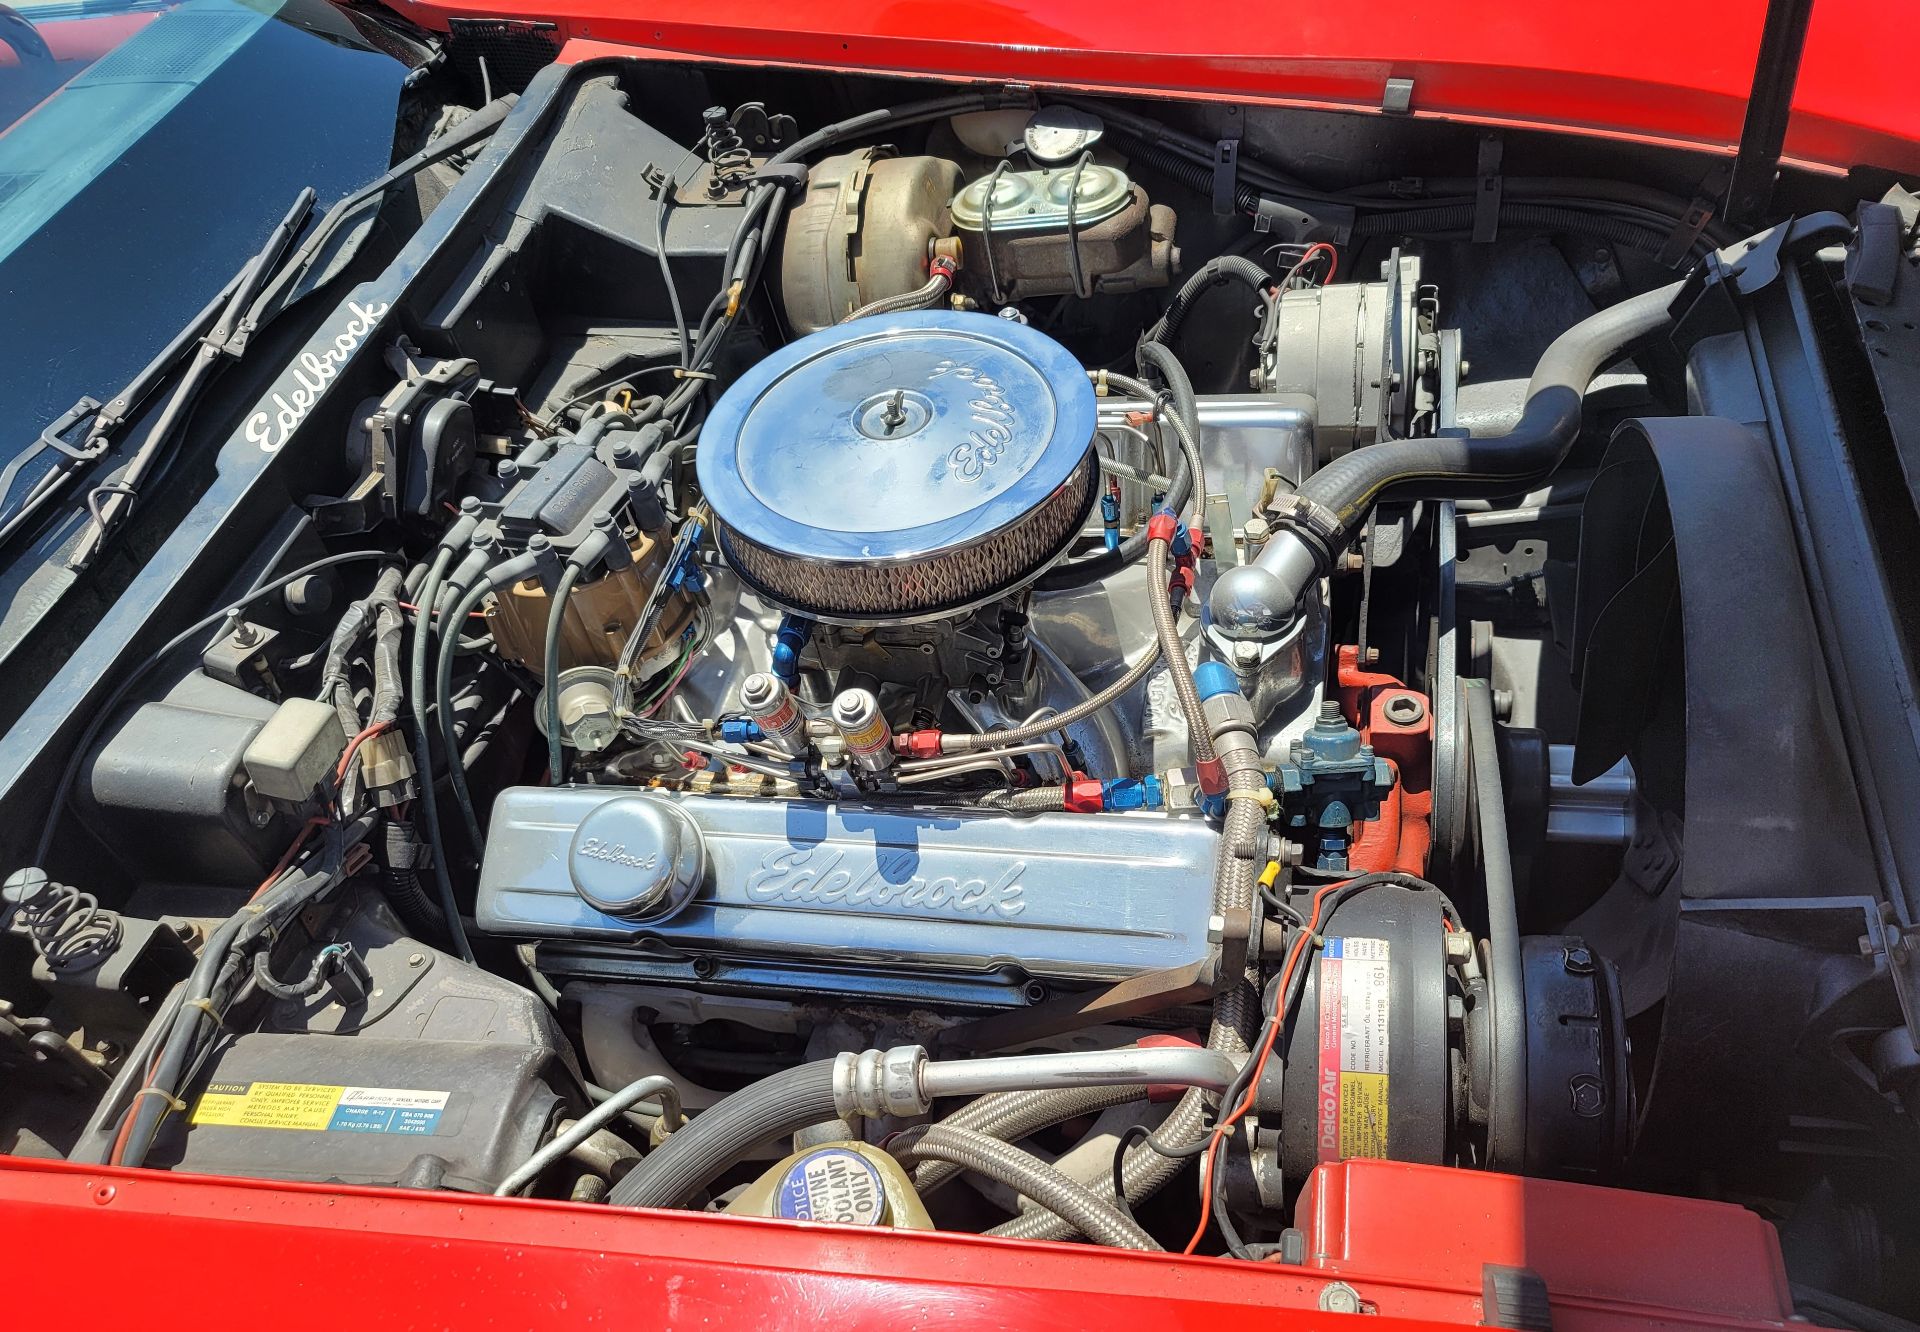 1980 CHEVROLET CORVETTE, WAS VIC EDELBROCK'S PERSONAL CAR BOUGHT FOR R&D, RED INTERIOR, TITLE ONLY. - Image 30 of 70